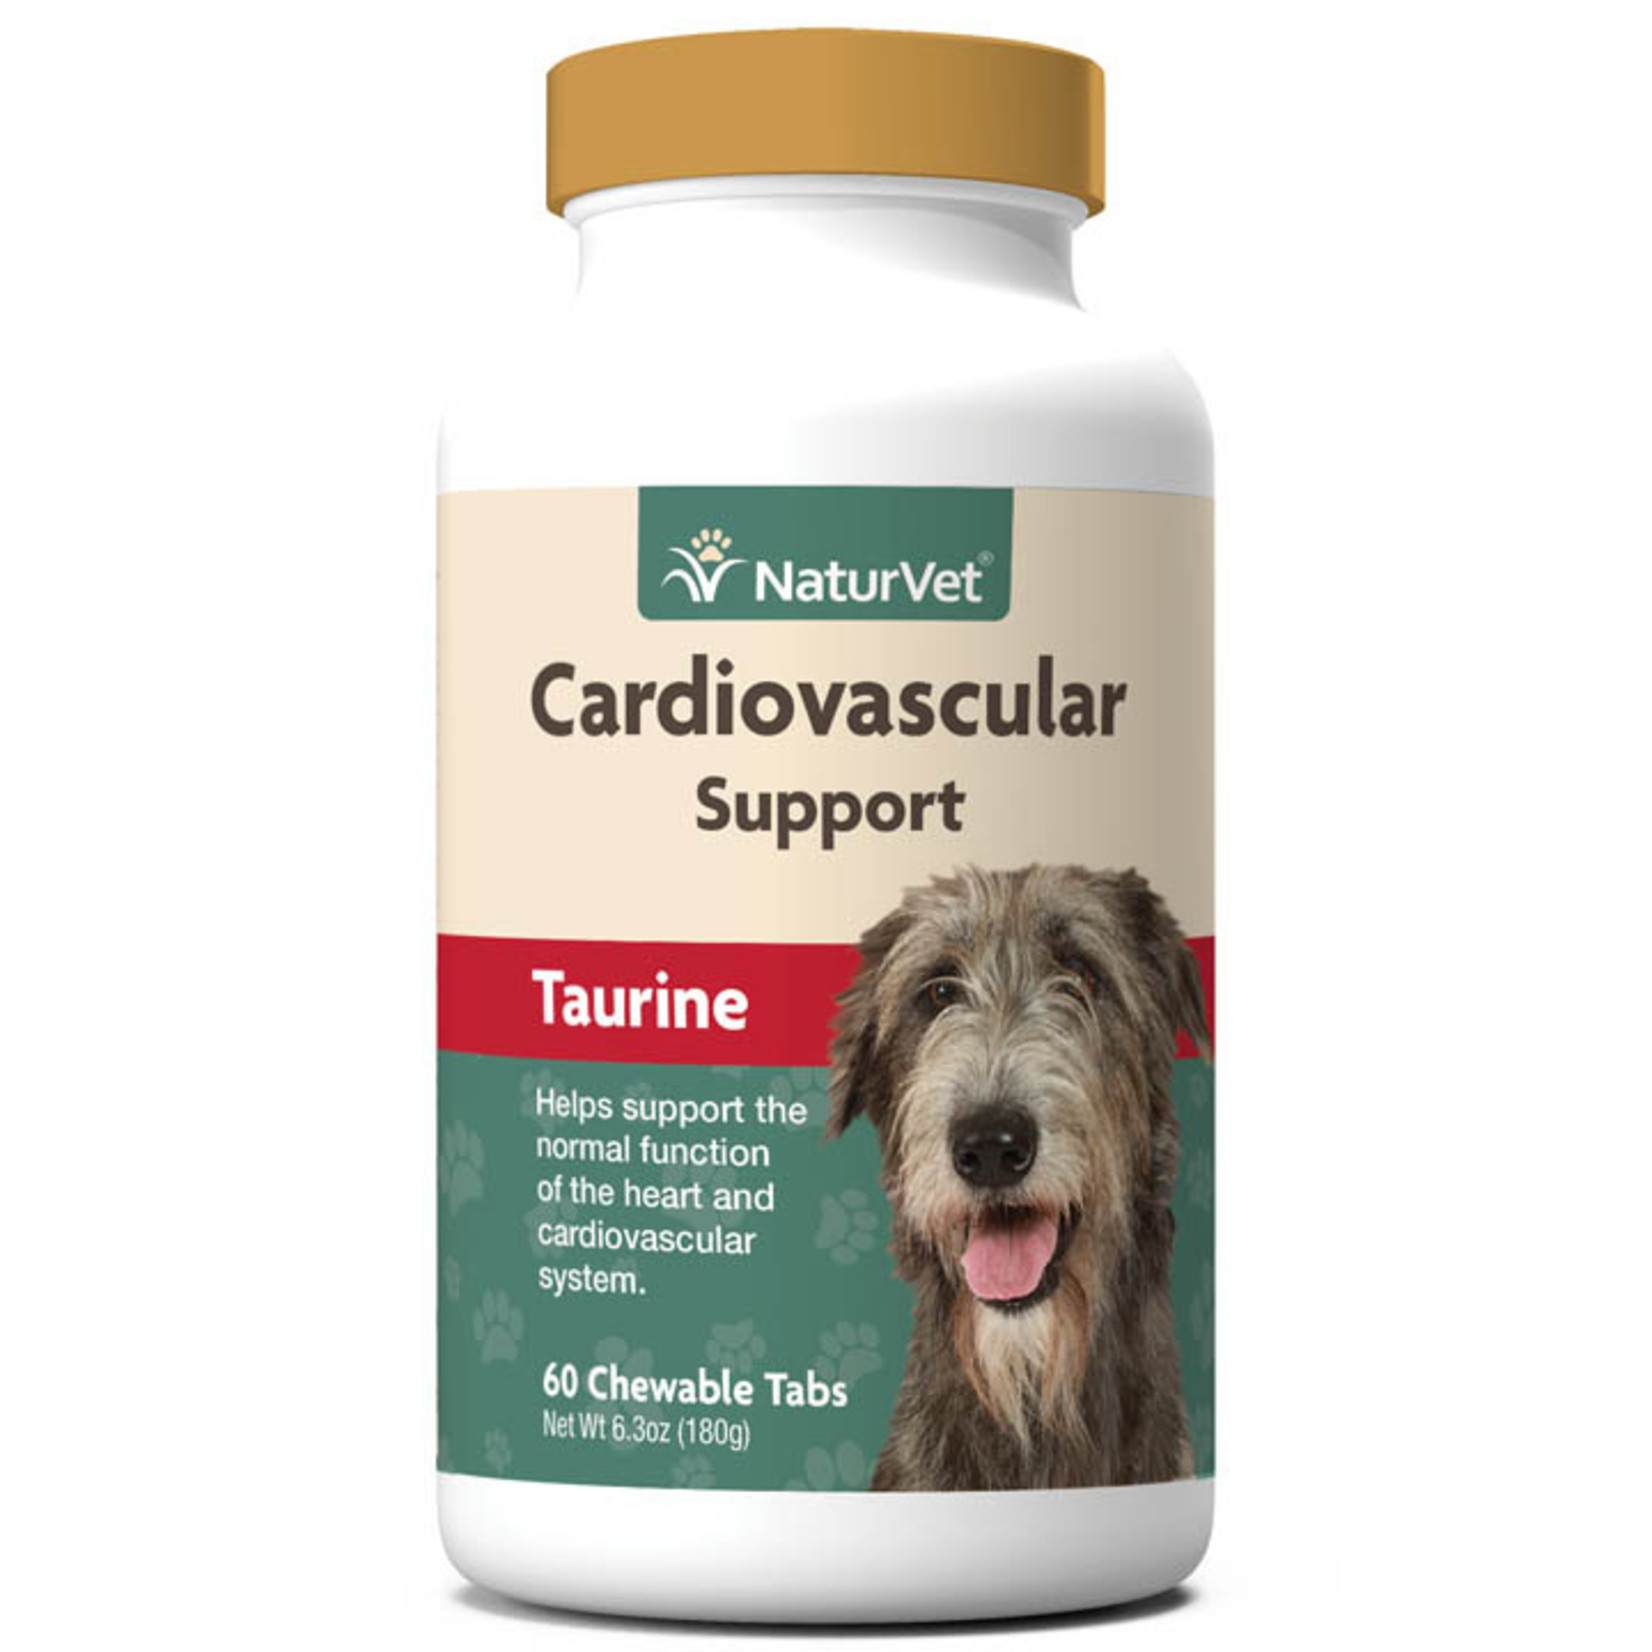 naturVet NaturVet Dog Cardiovascular Support with Taurine Chewable Tablets 60ct